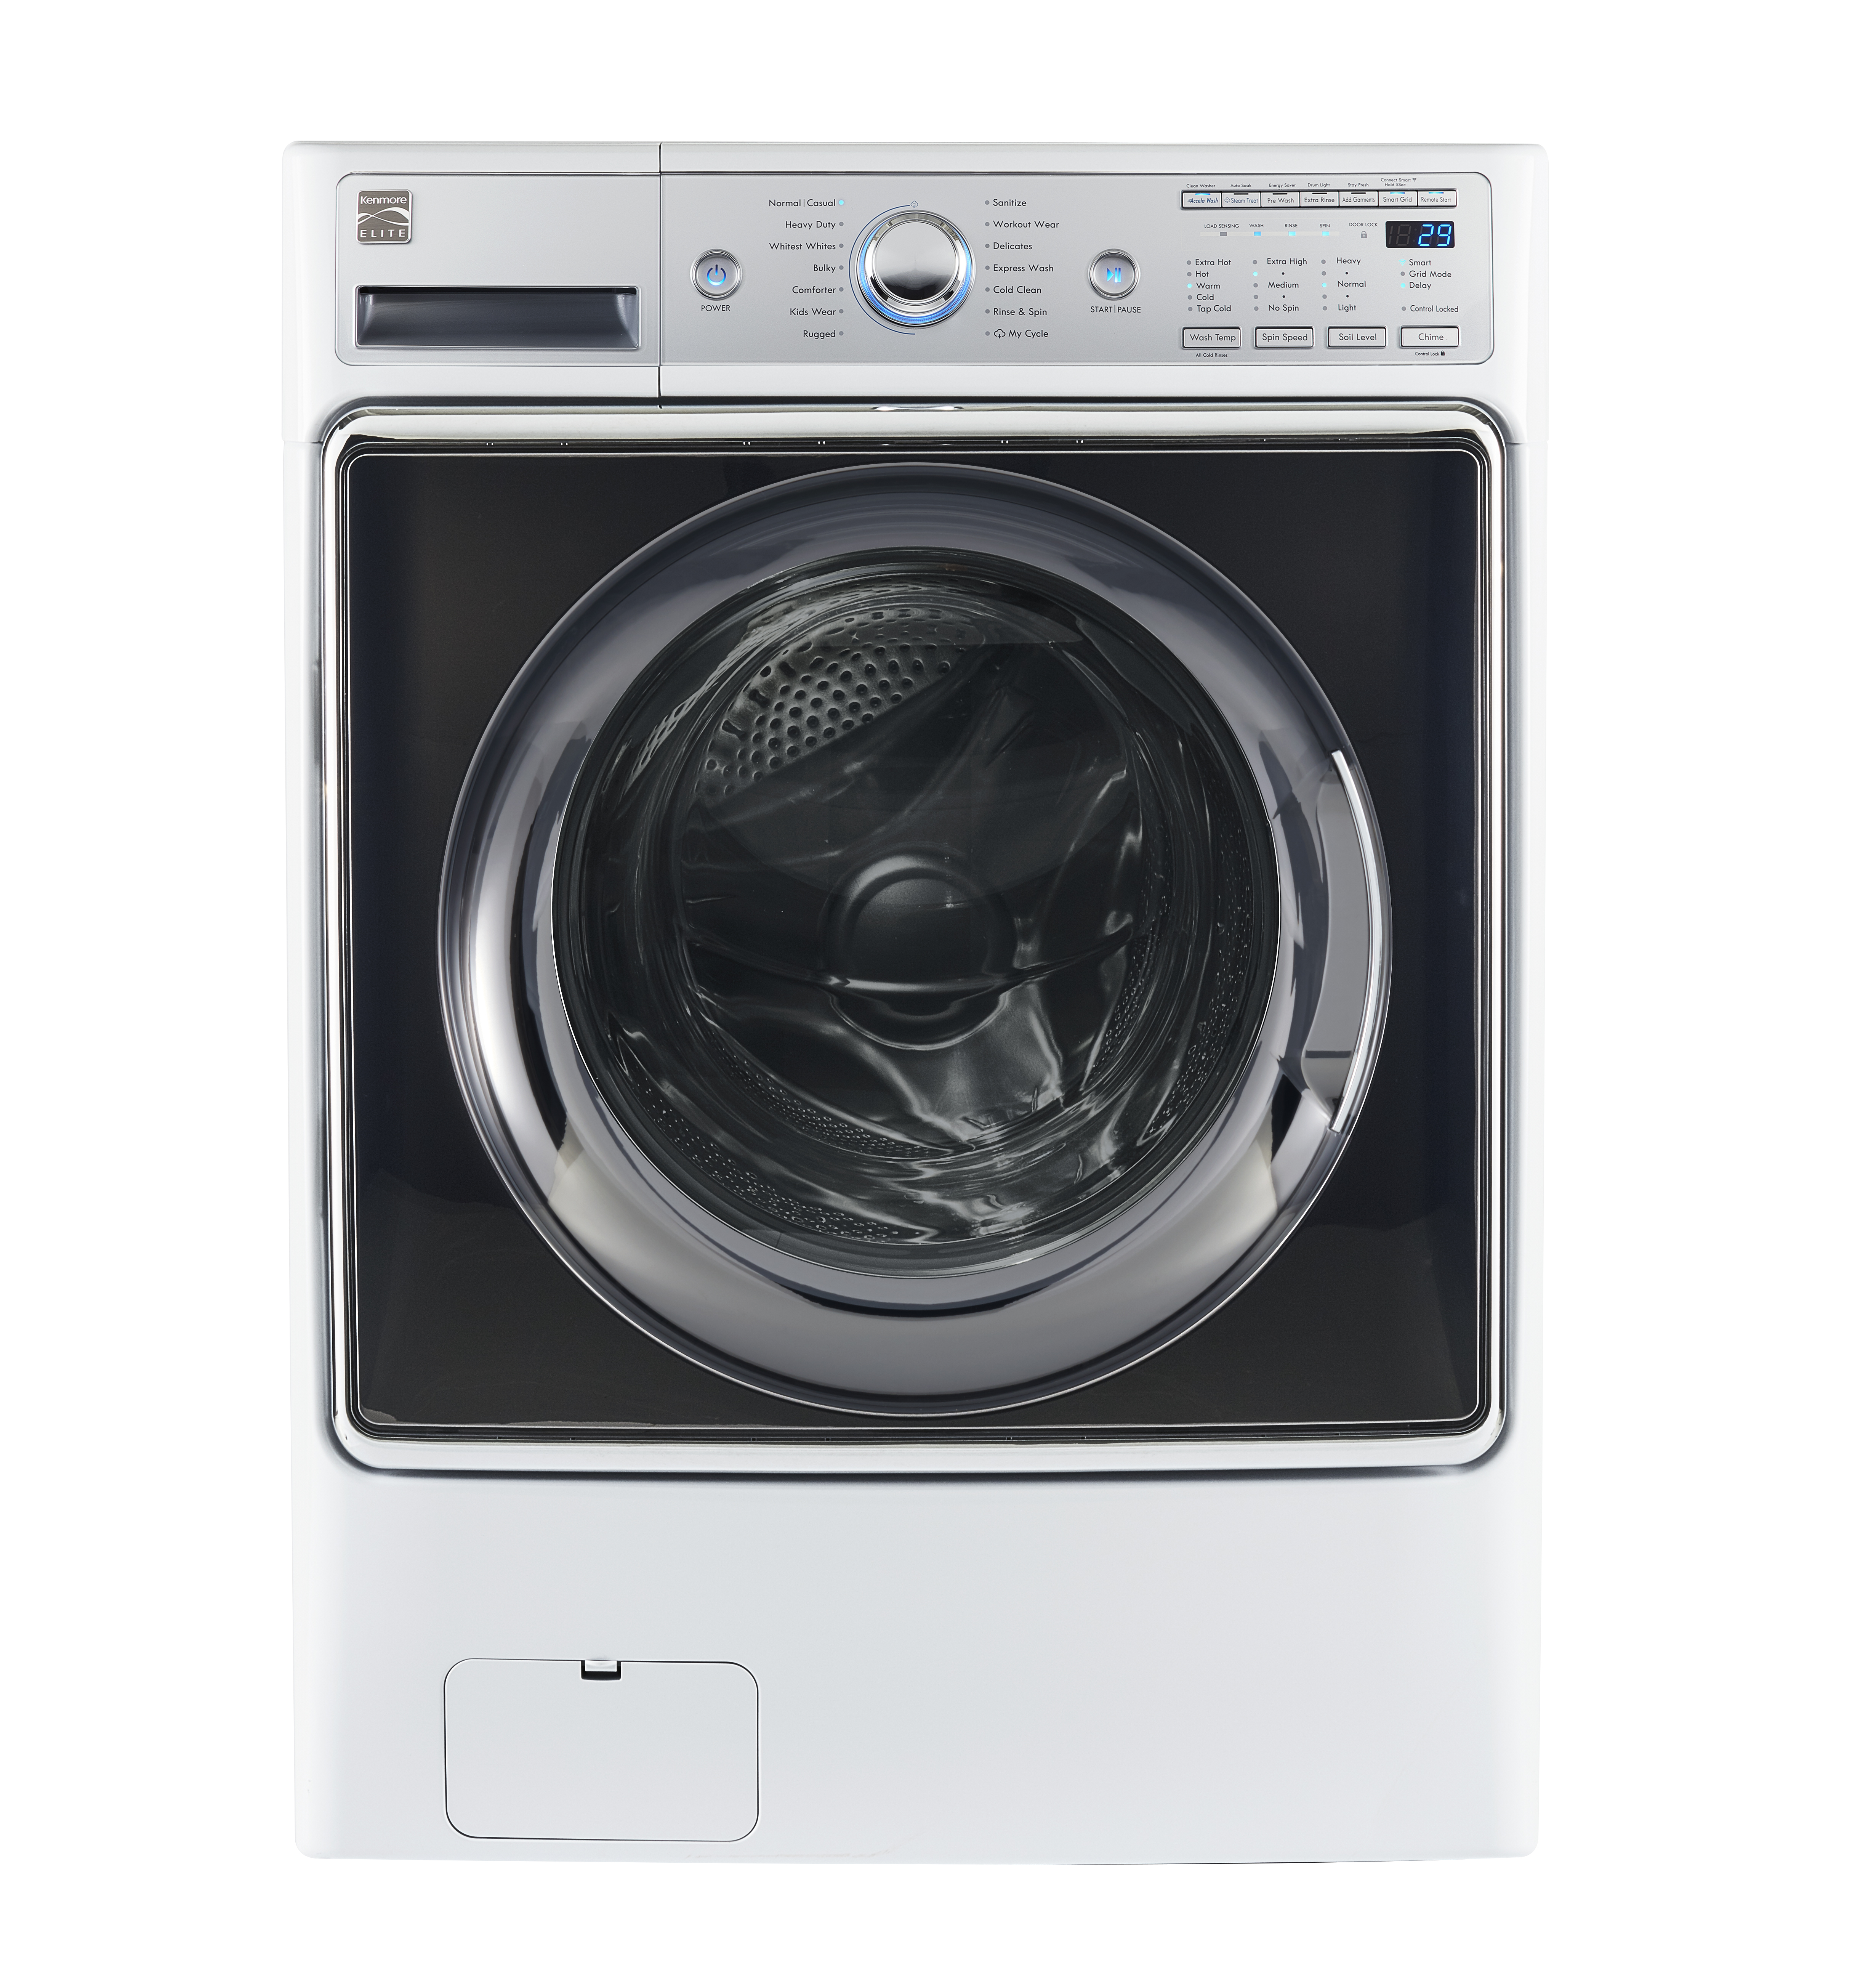 Kenmore Elite 41982 5.2 cu. ft. Smart Front-Load Washer with Accela Wash Technology